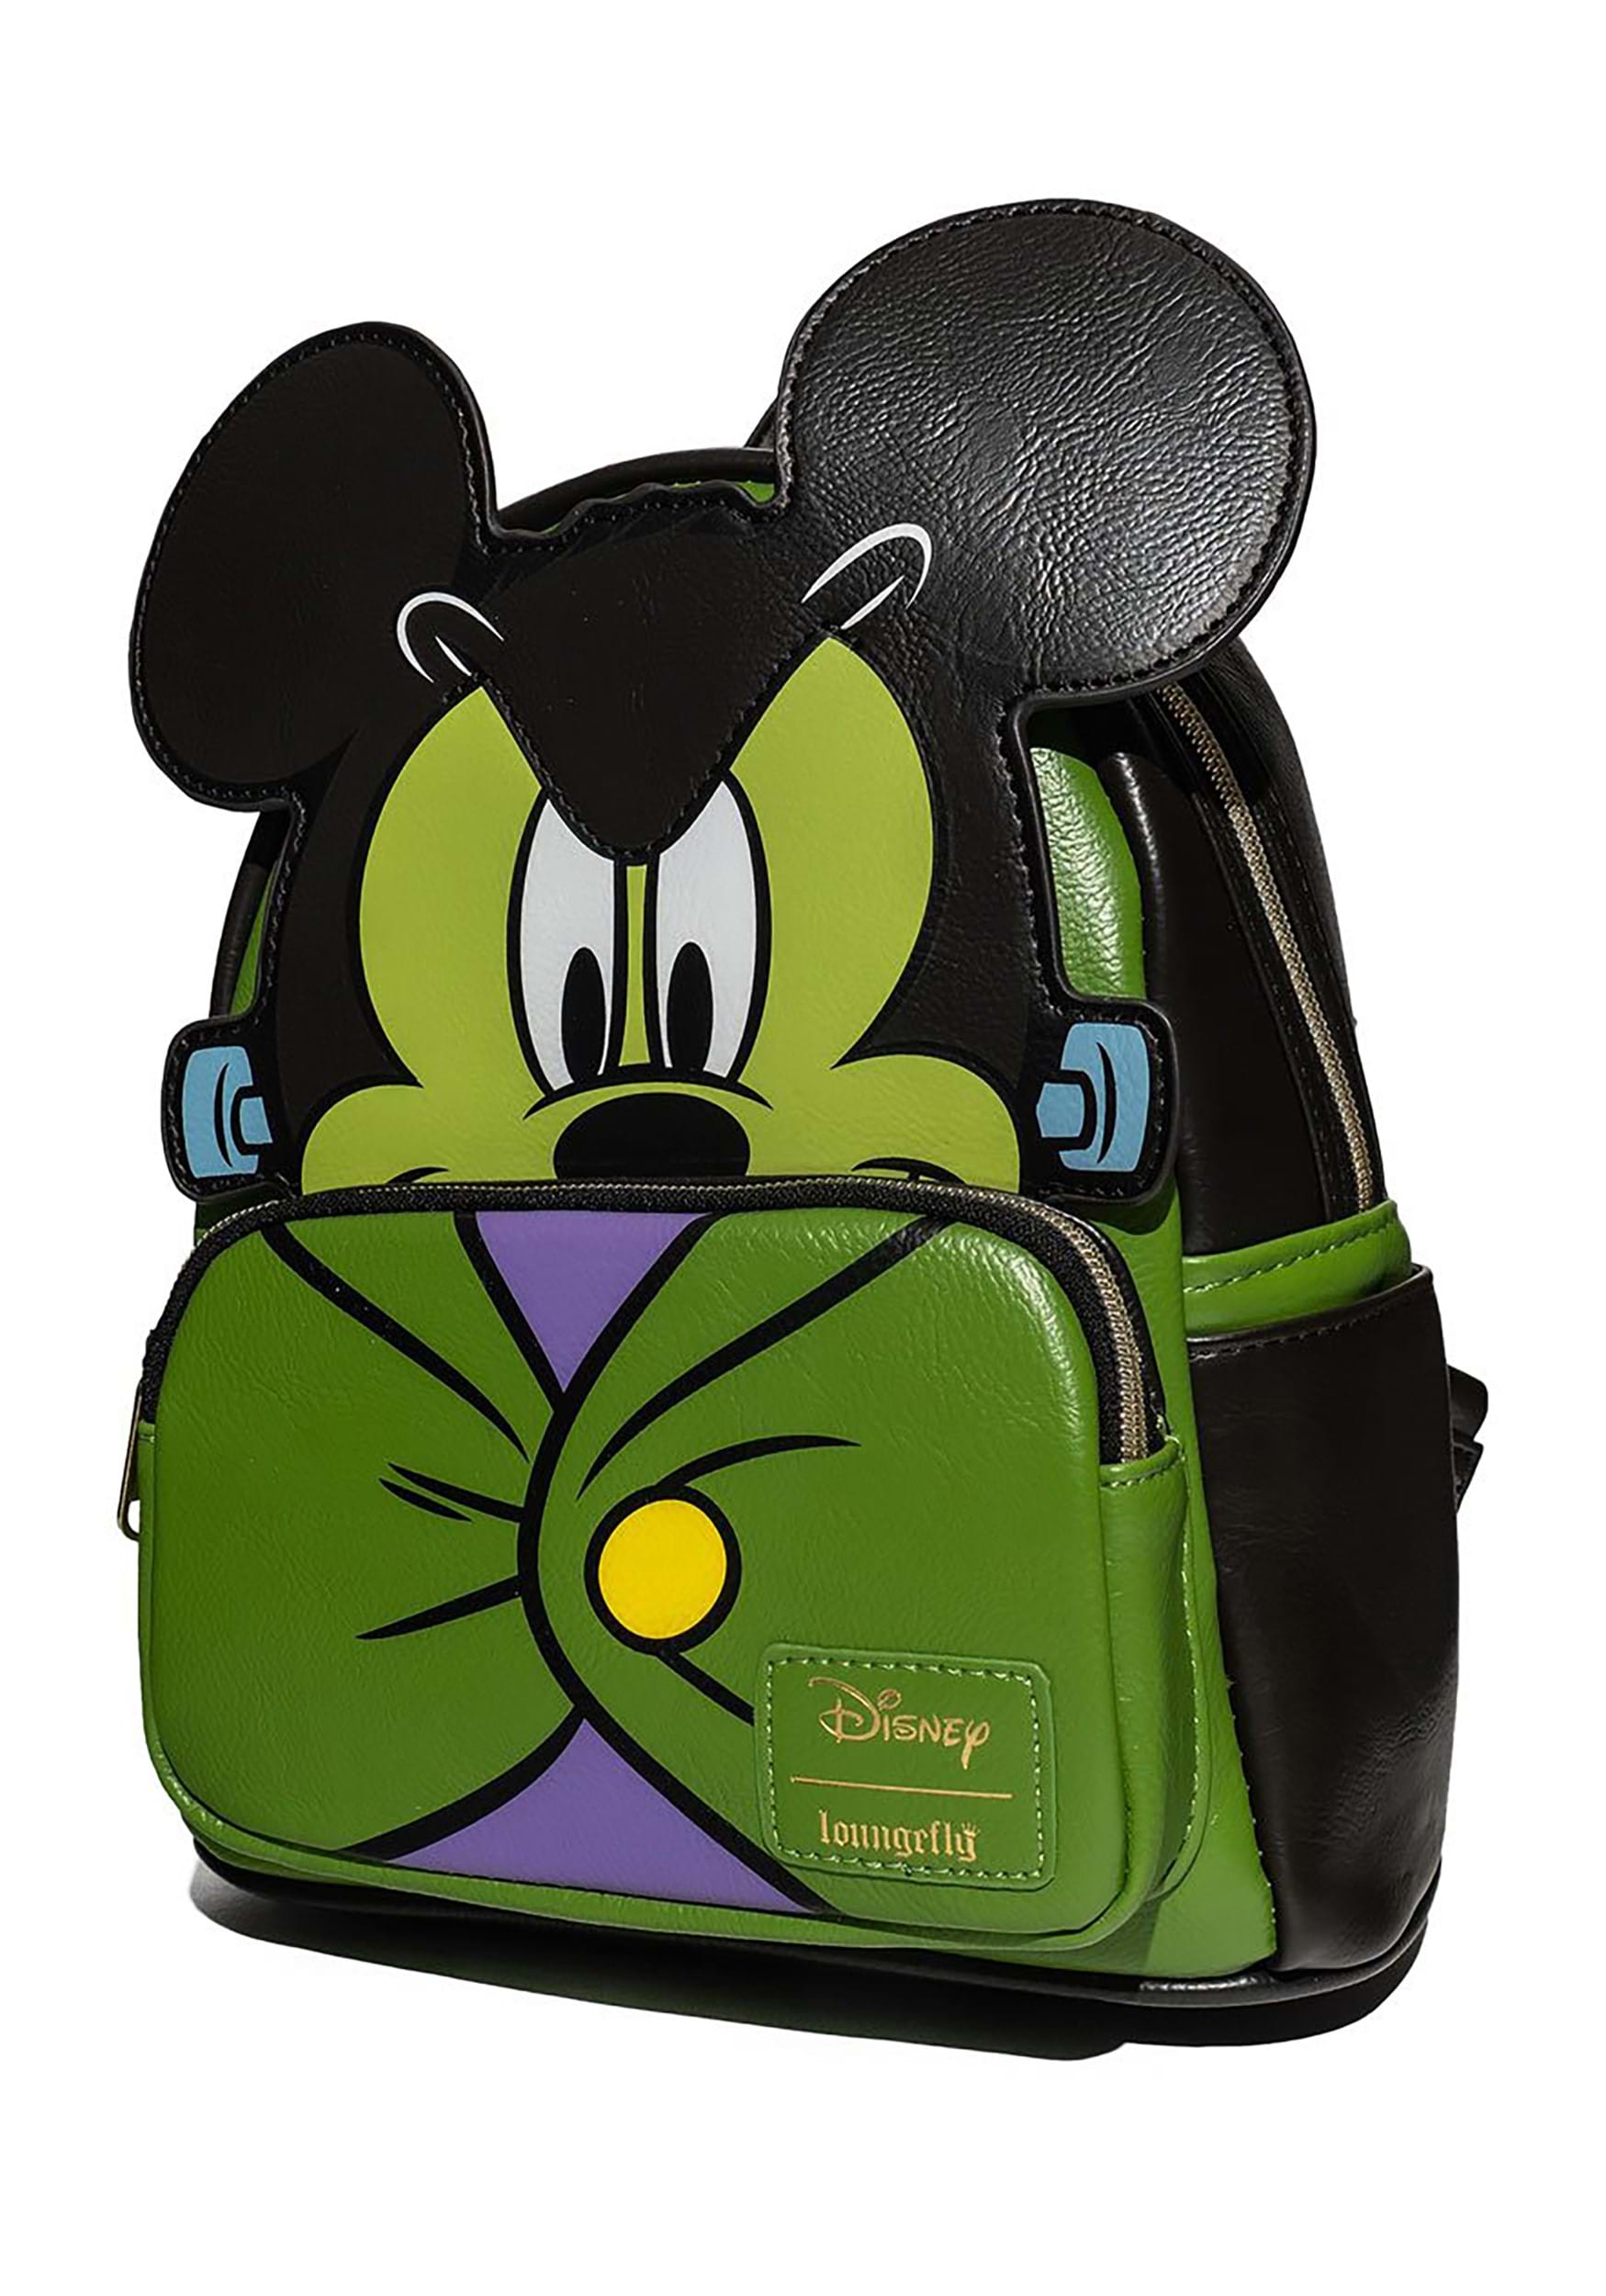 NEW WITH TAGS! Loungefly Disney Monsters, Inc. Faux Leather Mini Backpack!